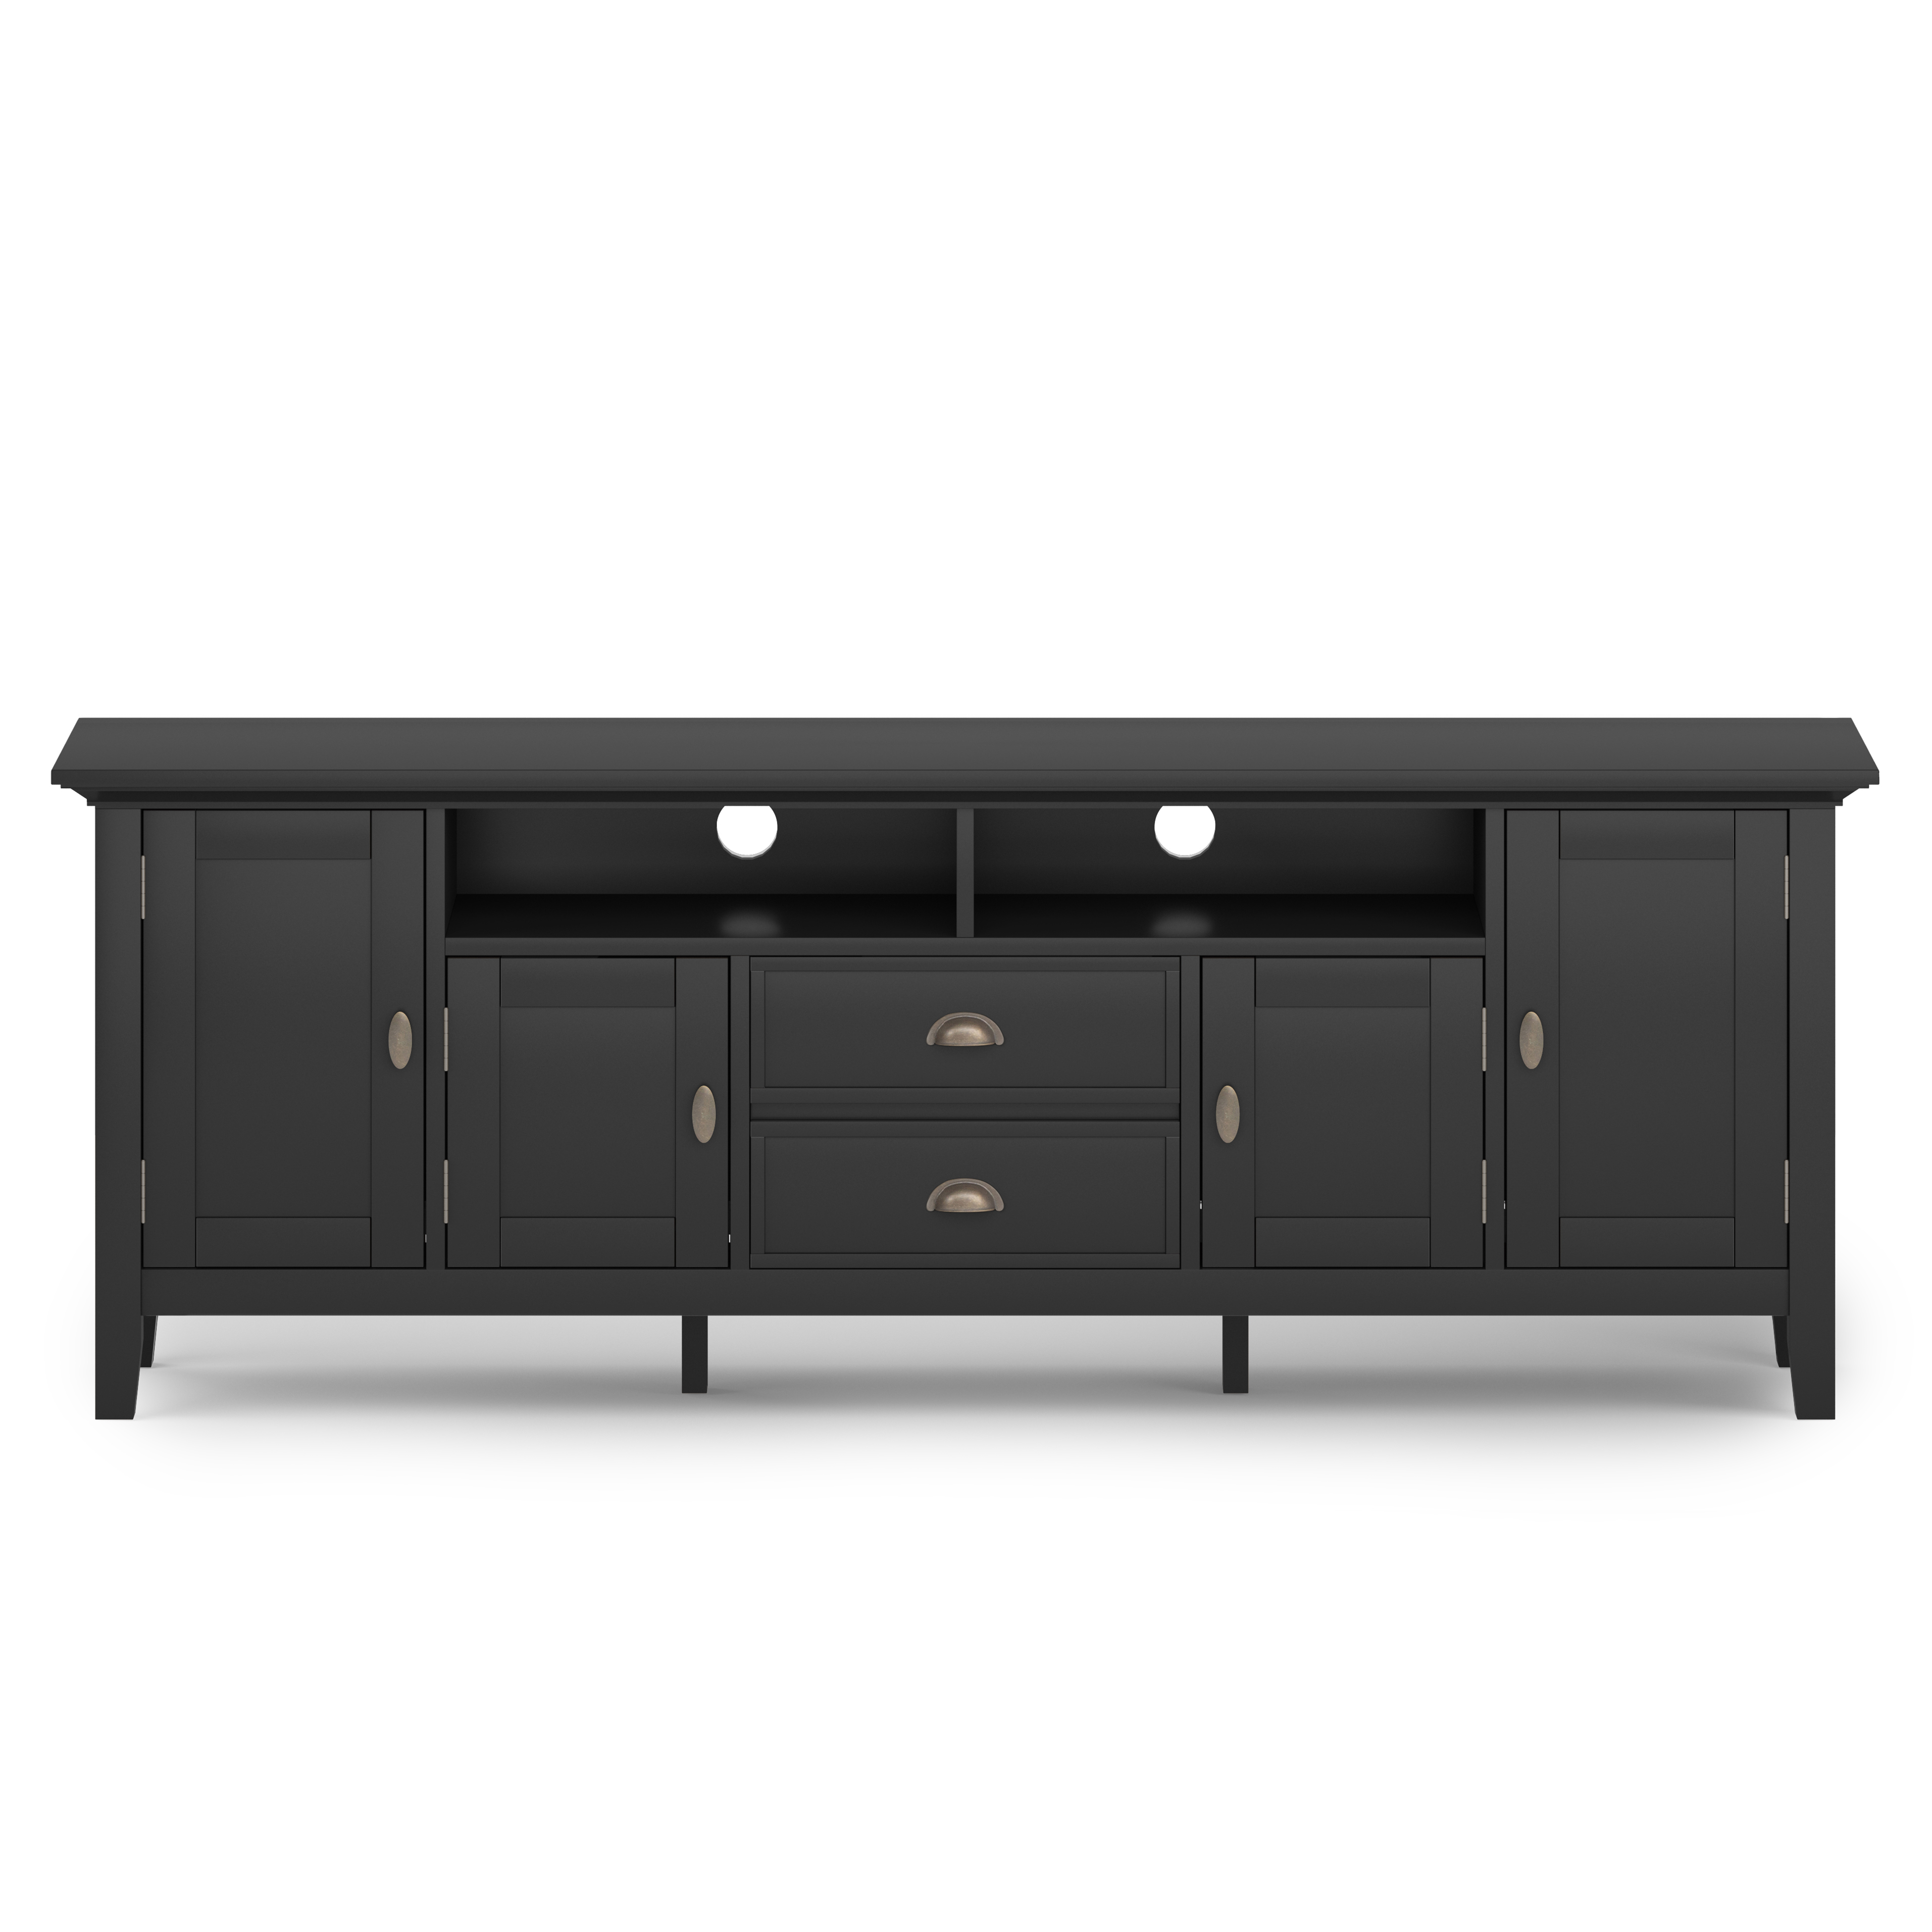 Simpli Home Redmond SOLID WOOD 72 inch TV Media Stand in Black For TVs up to 80 inches